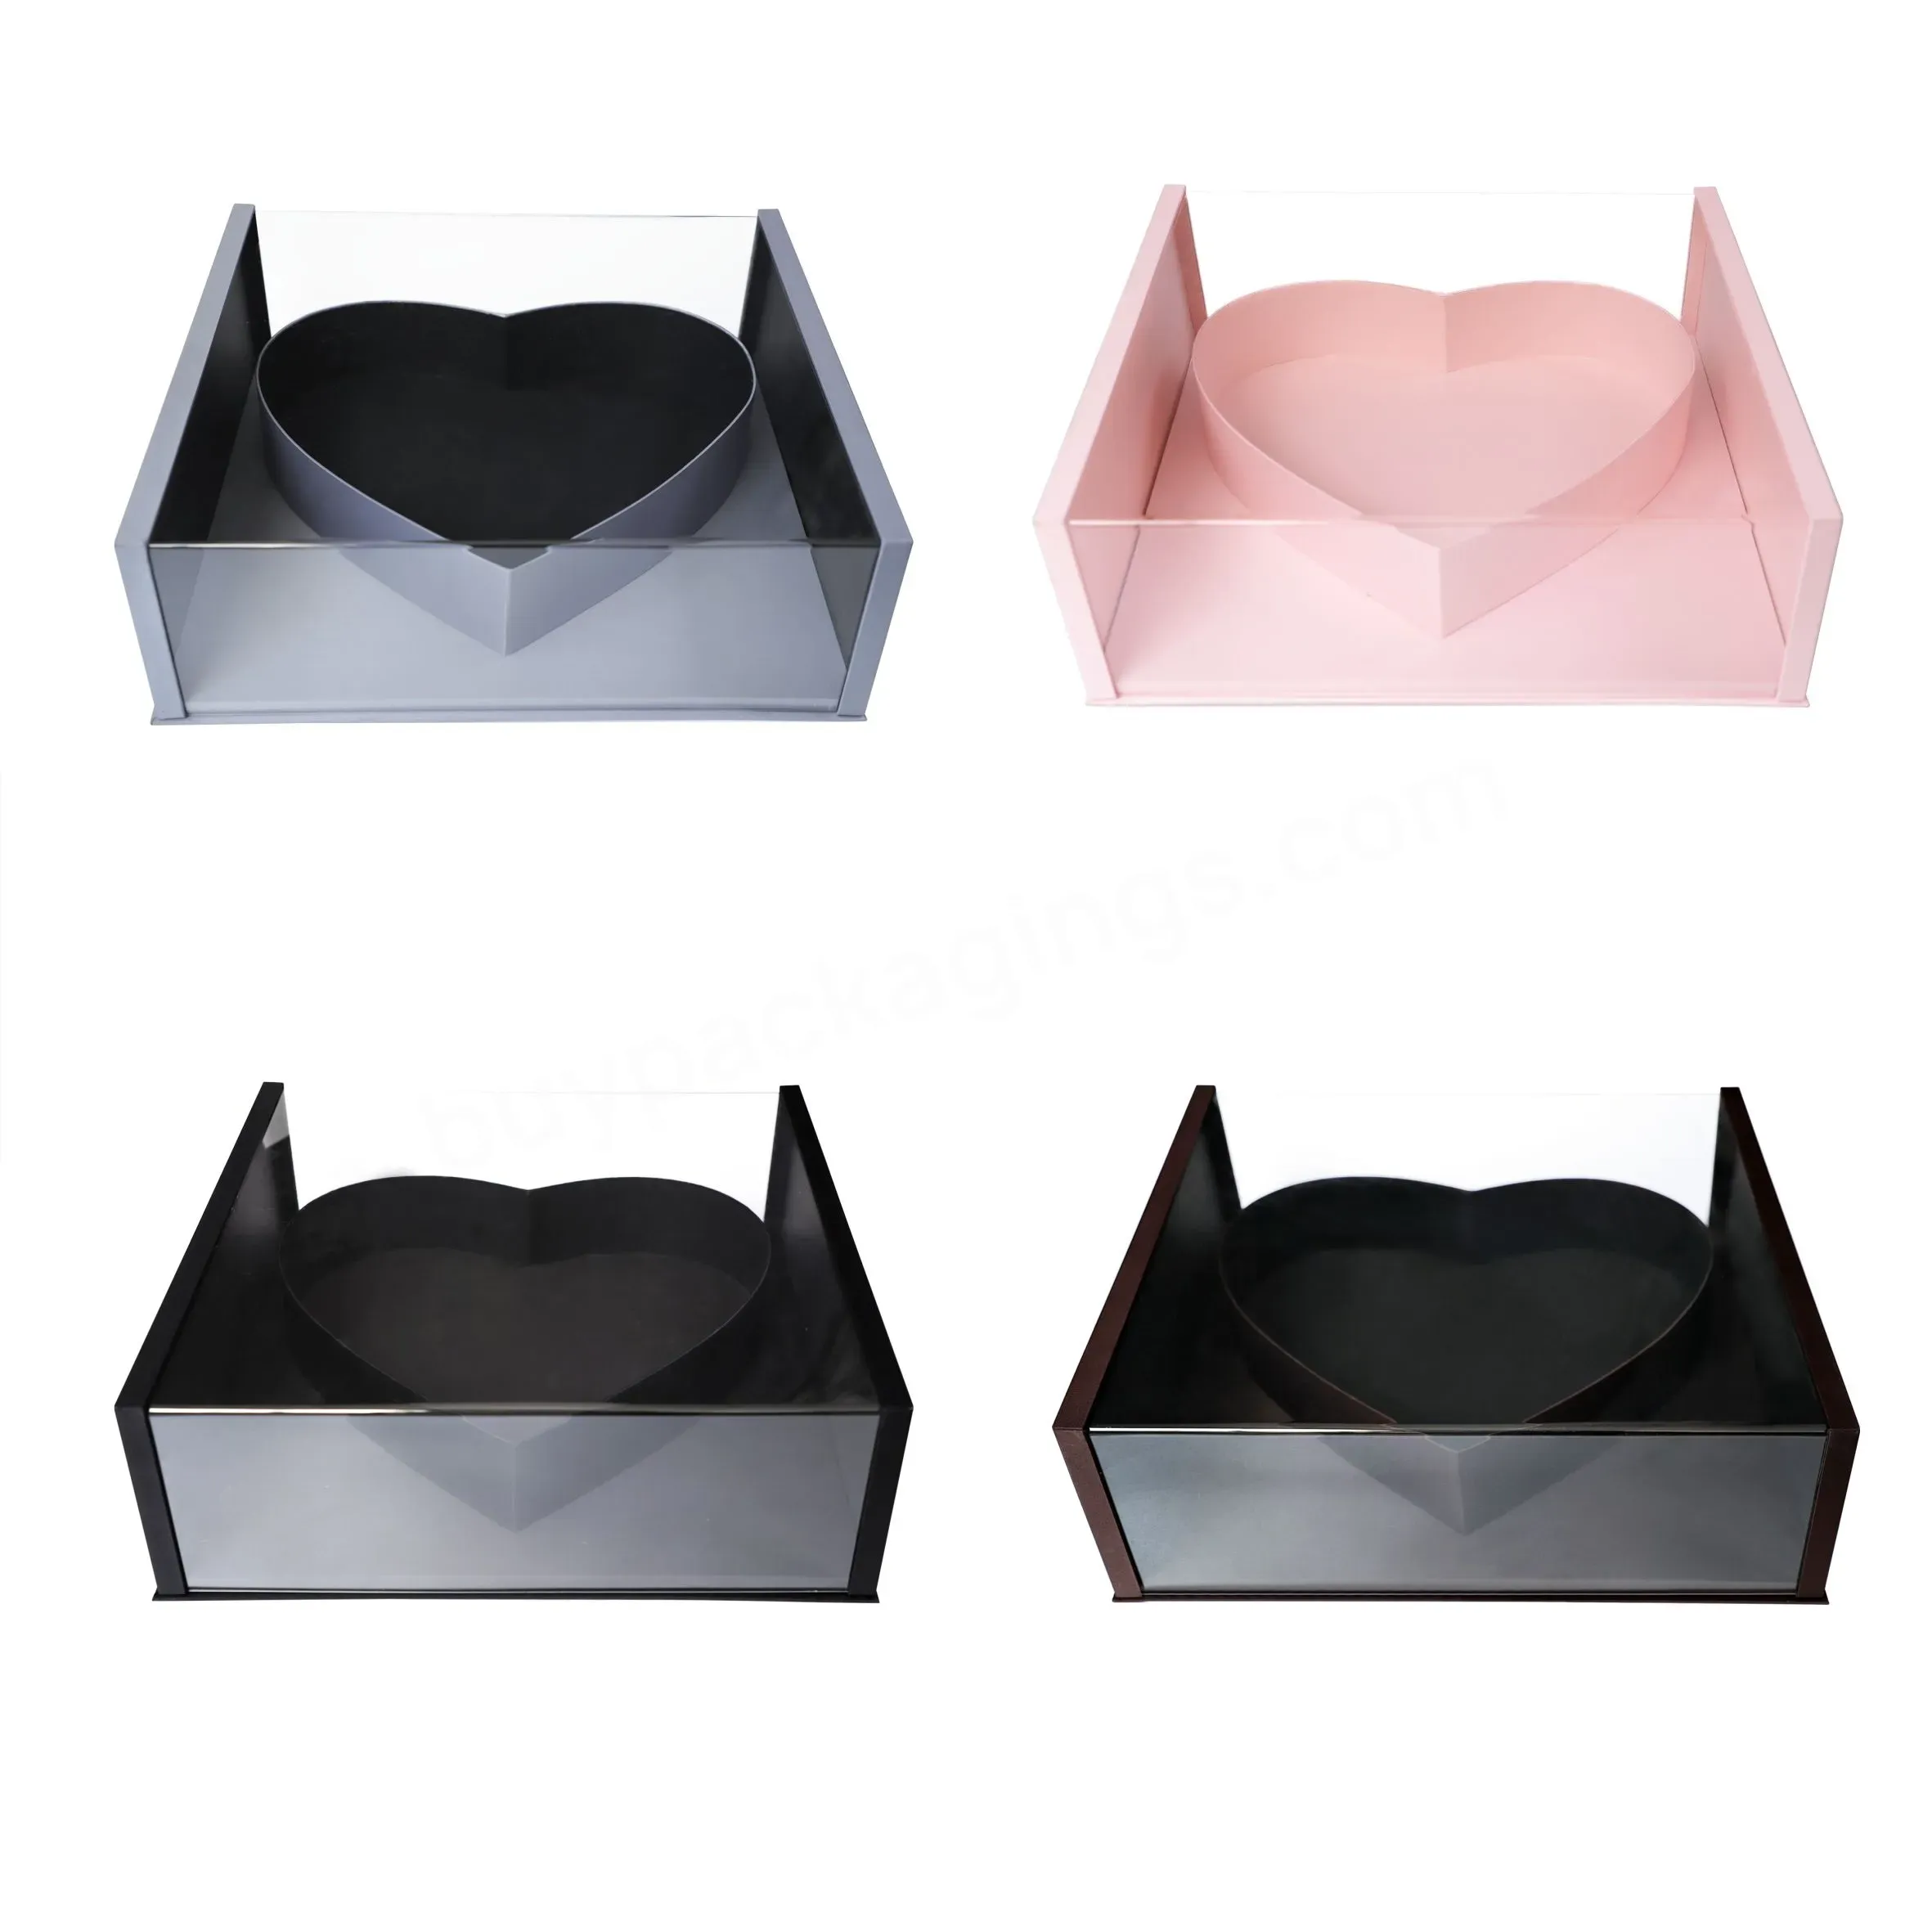 Premium Quality Square Flower Gift Boxes Silk Surface Finish Acrylic Box With Heart-shaped Slot - Buy Premium Quality Square Flower Gift Boxes,Silk Surface Finish Acrylic Box,Acrylic Box With Heart-shaped Slot.